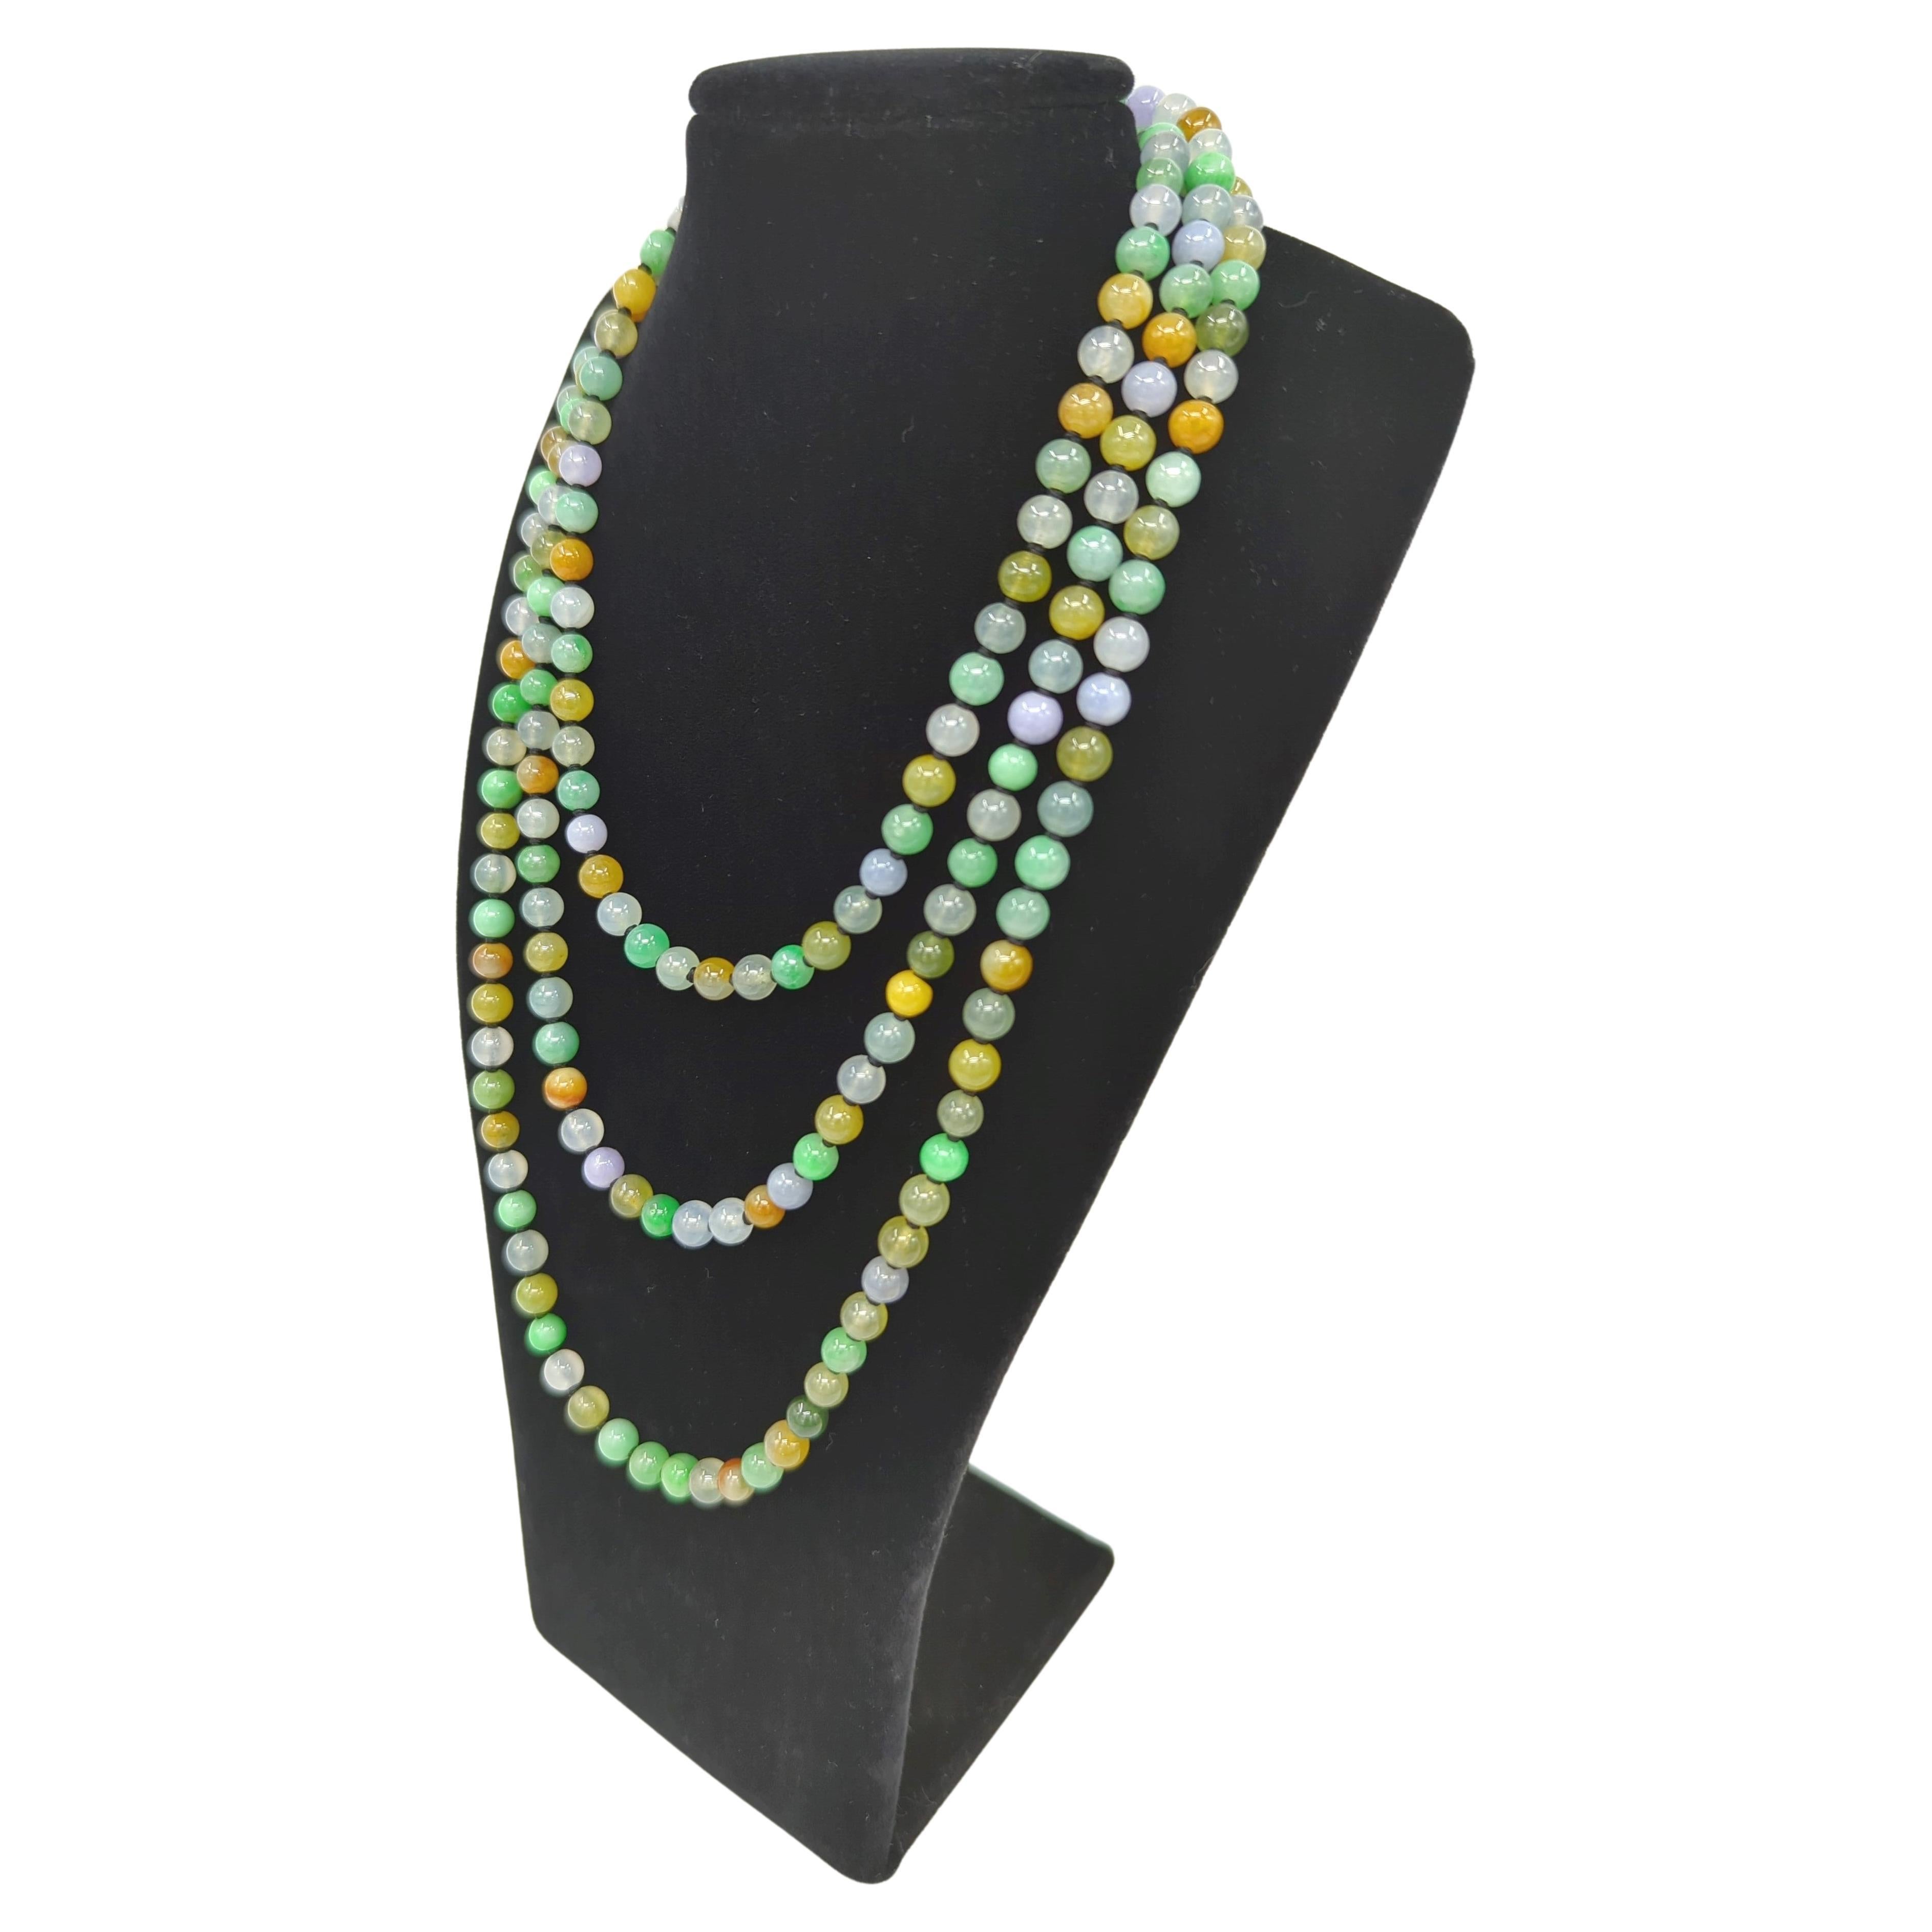 Exquisite Multicolor Icy Jadeite A-Grade 200 Beads Necklace Very Long Strand 52